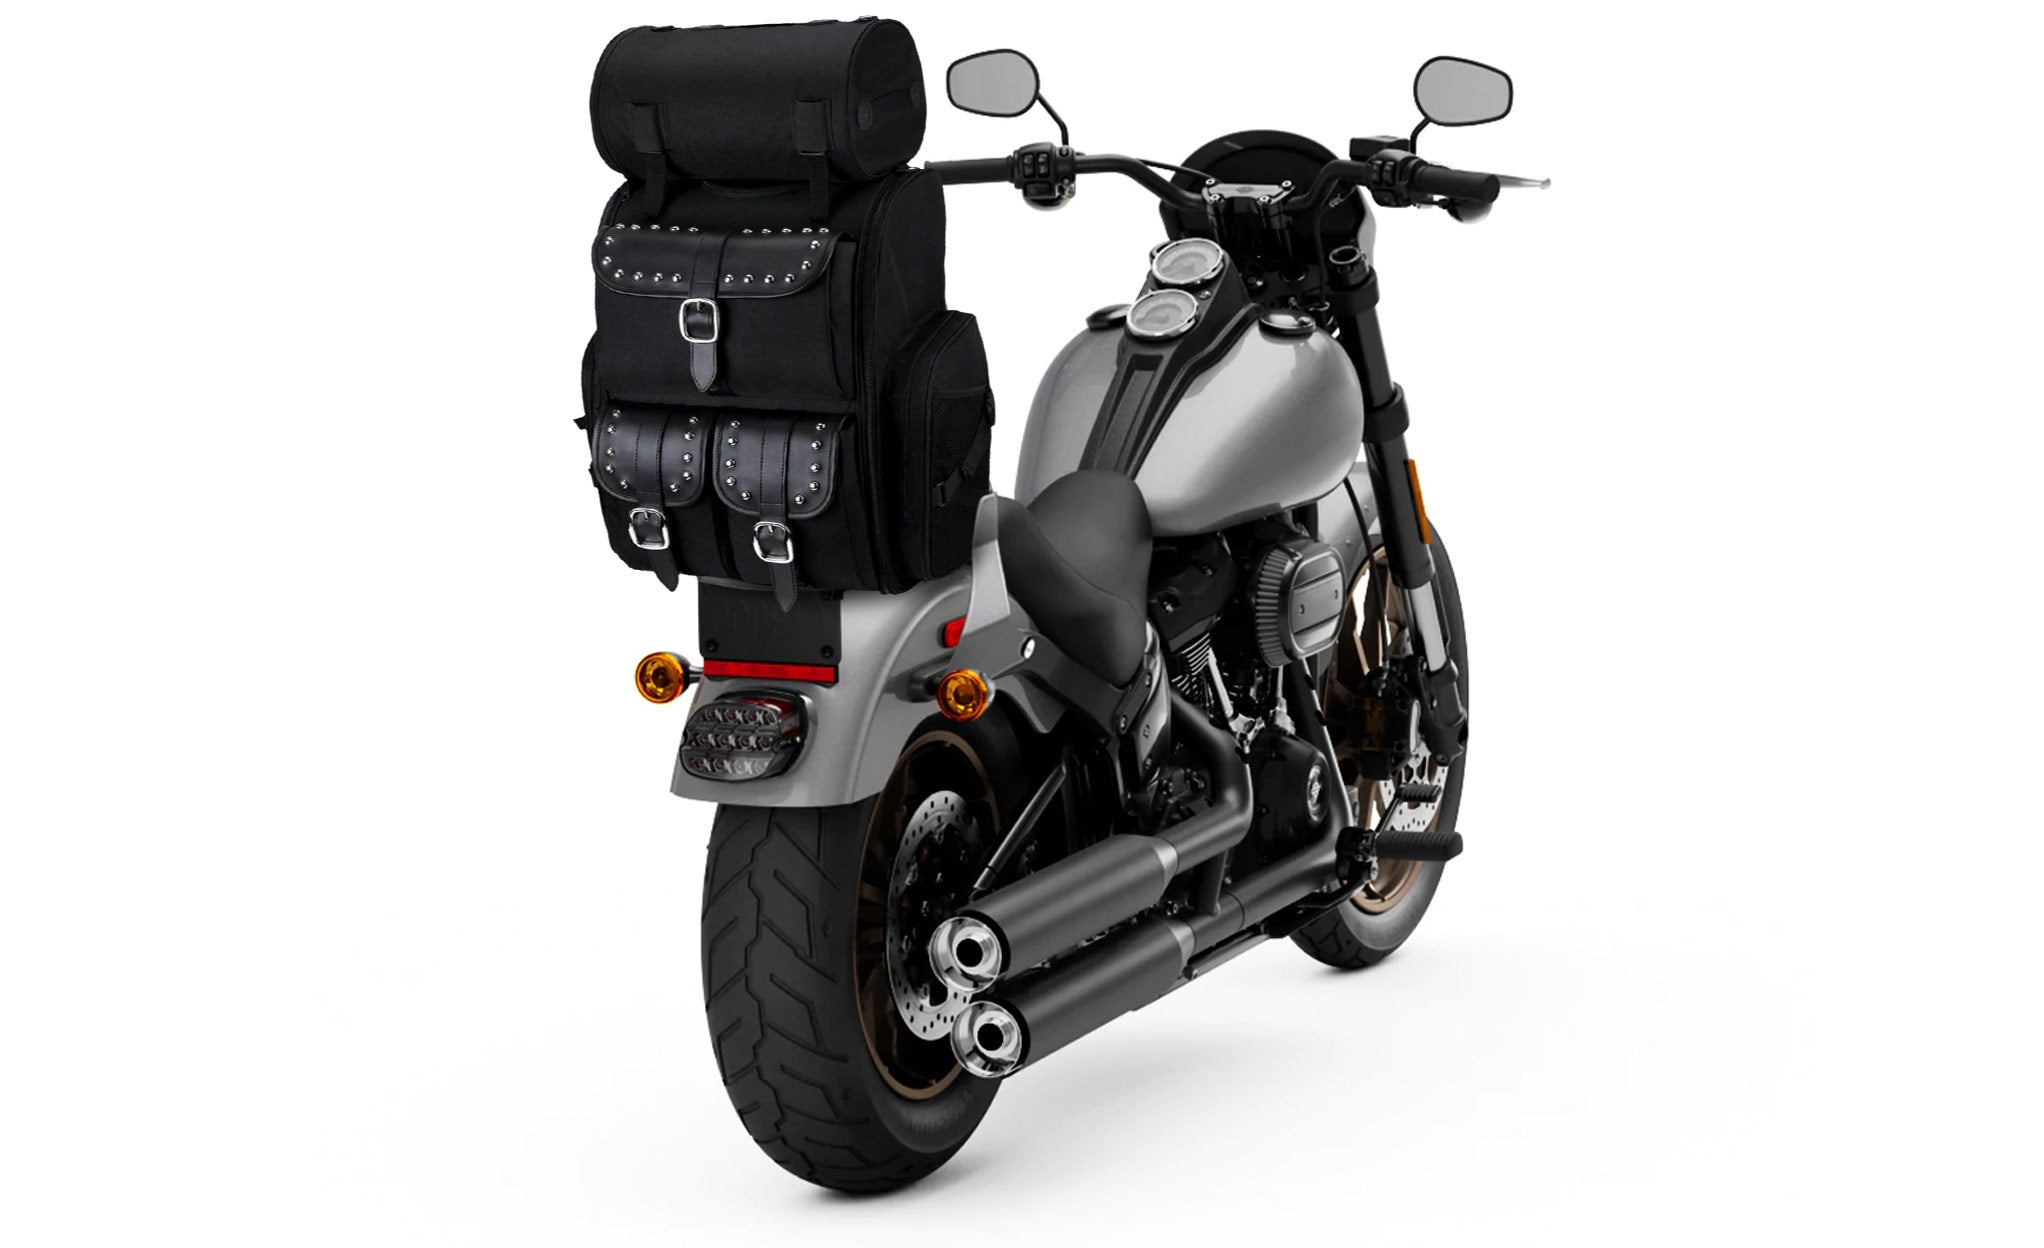 Viking Highway Extra Large Studded Indian Motorcycle Sissy Bar Bag Bag on Bike View @expand